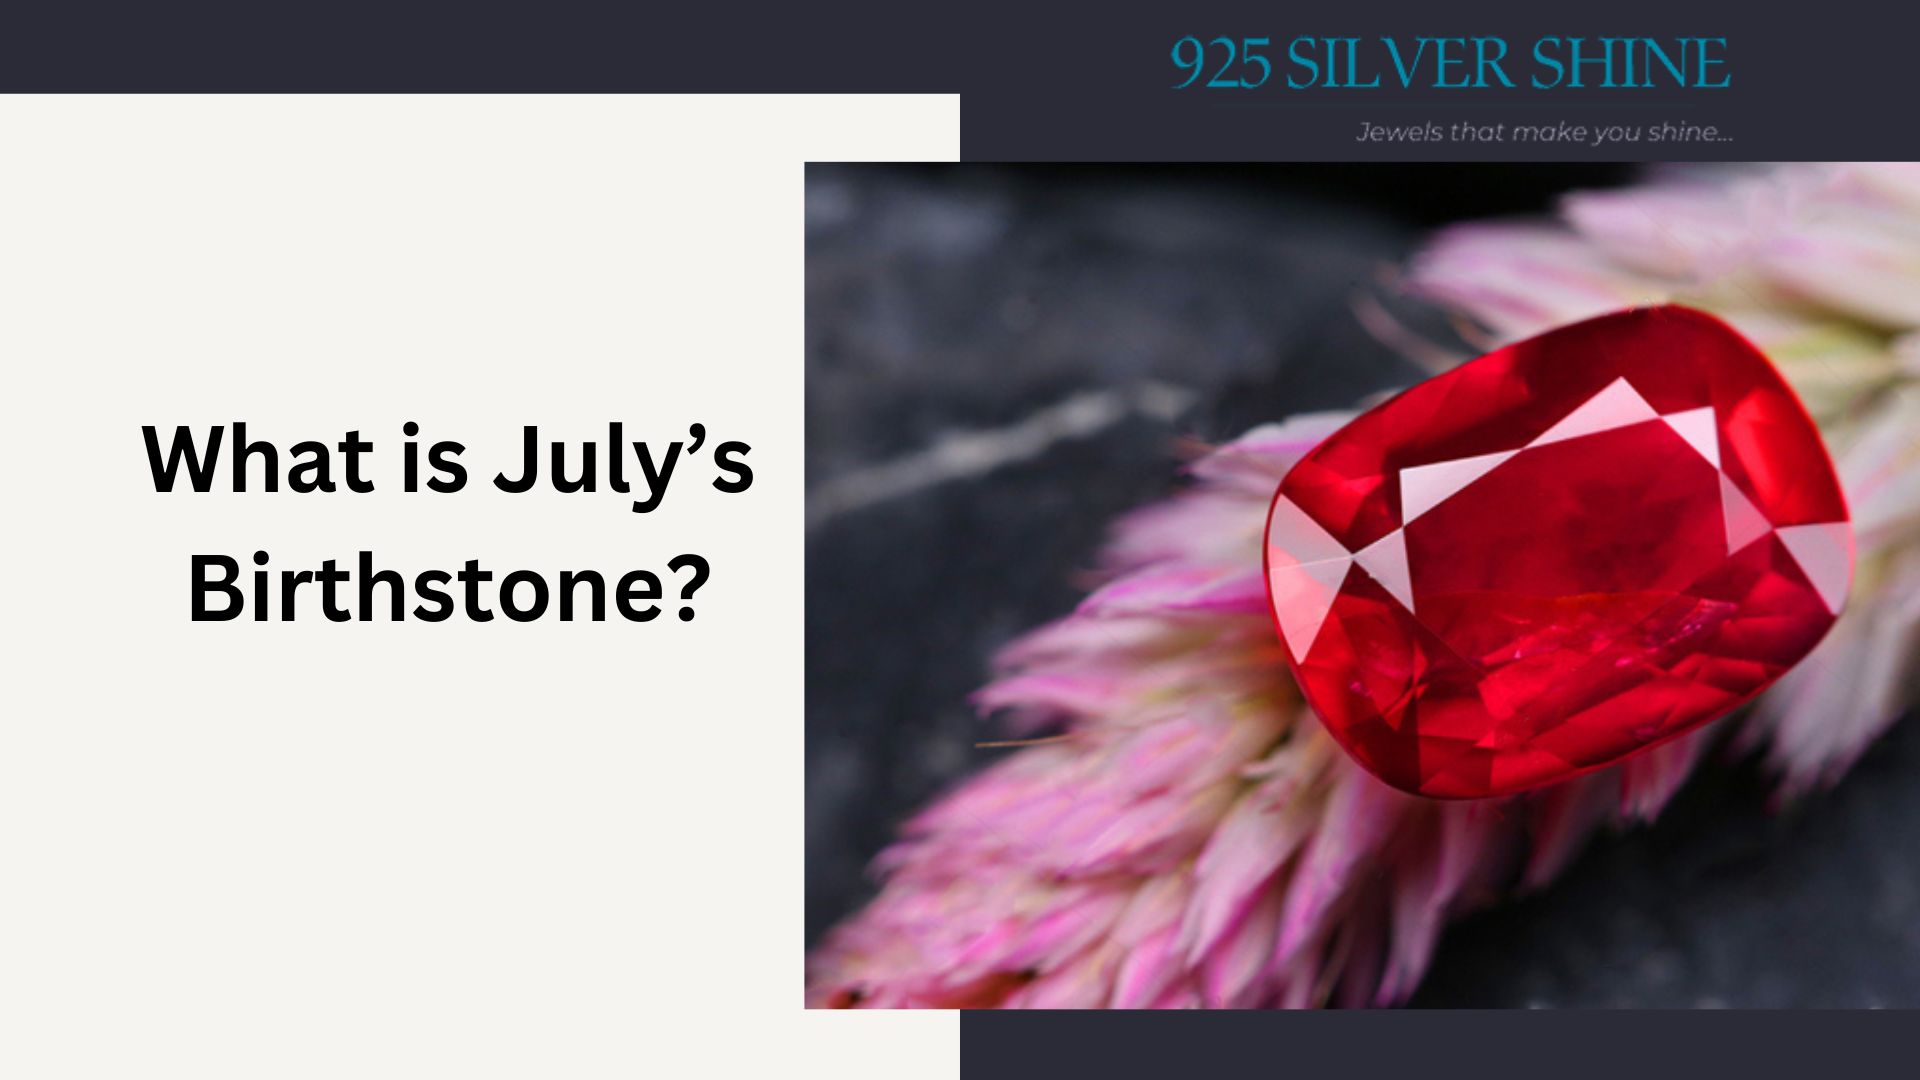 july birthstone, cancer zodiac birth month, cancer birthstone, ruby jewelry, benefits of ruby, what is the birthstone for july, ruby engagement rings, july 29 birthstone, july 23 birthstone, july 25th birthstone, july 30 birthstone, top 10 benefits of ruby stone, july birthstone cancer, july birthstone pandora ring, ruby birthstone jewelry, ruby jewellery for men, ruby vintage jewelry, july birthstone uk, benefits of wearing ruby ring, ruby jewelry australia, what are the advantages of using silver ruby jewelry, ruby jewelry for women, july birthstone earrings pandora, july birthstone engagement rings, july birthstone ring for men, july birthstone carnelian, july birthstone stud earrings, july birthstone necklace for mom, july birthstone garnet, july and october birthstone ring, ruby stone benefits and side effects, benefits of wearing ruby in index finger, birthstone july australia, july leo birthstone, july birthstone month, july birthstone moonstone, july birthstone zodiac sign, ruby jewelry bracelets, benefits of wearing ruby and panna together, july birthstone bracelet, july first birthstone, what is your birthstone if your born in july, ruby jewelry for 40th wedding anniversary, natural ruby benefits, july birthstone anklet, july birthstone ring silver, july birthstone stackable ring, july birthstone silver necklace, july birthstone wedding ring, july zodiac birthstone, july 31 zodiac birthstone, ruby wholesale jewelry, benefits of ruby stone in astrology, benefits of wearing ruby in middle finger, july birthstone jewellery uk, ruby jewelry los angeles, july birthstone gift for mom, july birthstone gift ideas for her, july gemini birthstone, july birthstone idea, women's july birthstone jewelry, men's july birthstone jewelry, july 31 leo birthstone, ruby ethnic jewelry, ruby jewelry for mom, ruby jewellery for baby girl, ruby gemstones, ruby gemstone jewelry wholesale, personalised ruby jewellery, healing properties of ruby stone, spiritual benefits of wearing ruby in ring, sterling silver ruby jewelry, 925 silver ruby jewelry, ruby jewelry with stelring silver, ruby ring, ruby earring, silver ruby jewelry India, july birthstone USA, ruby stone significance 